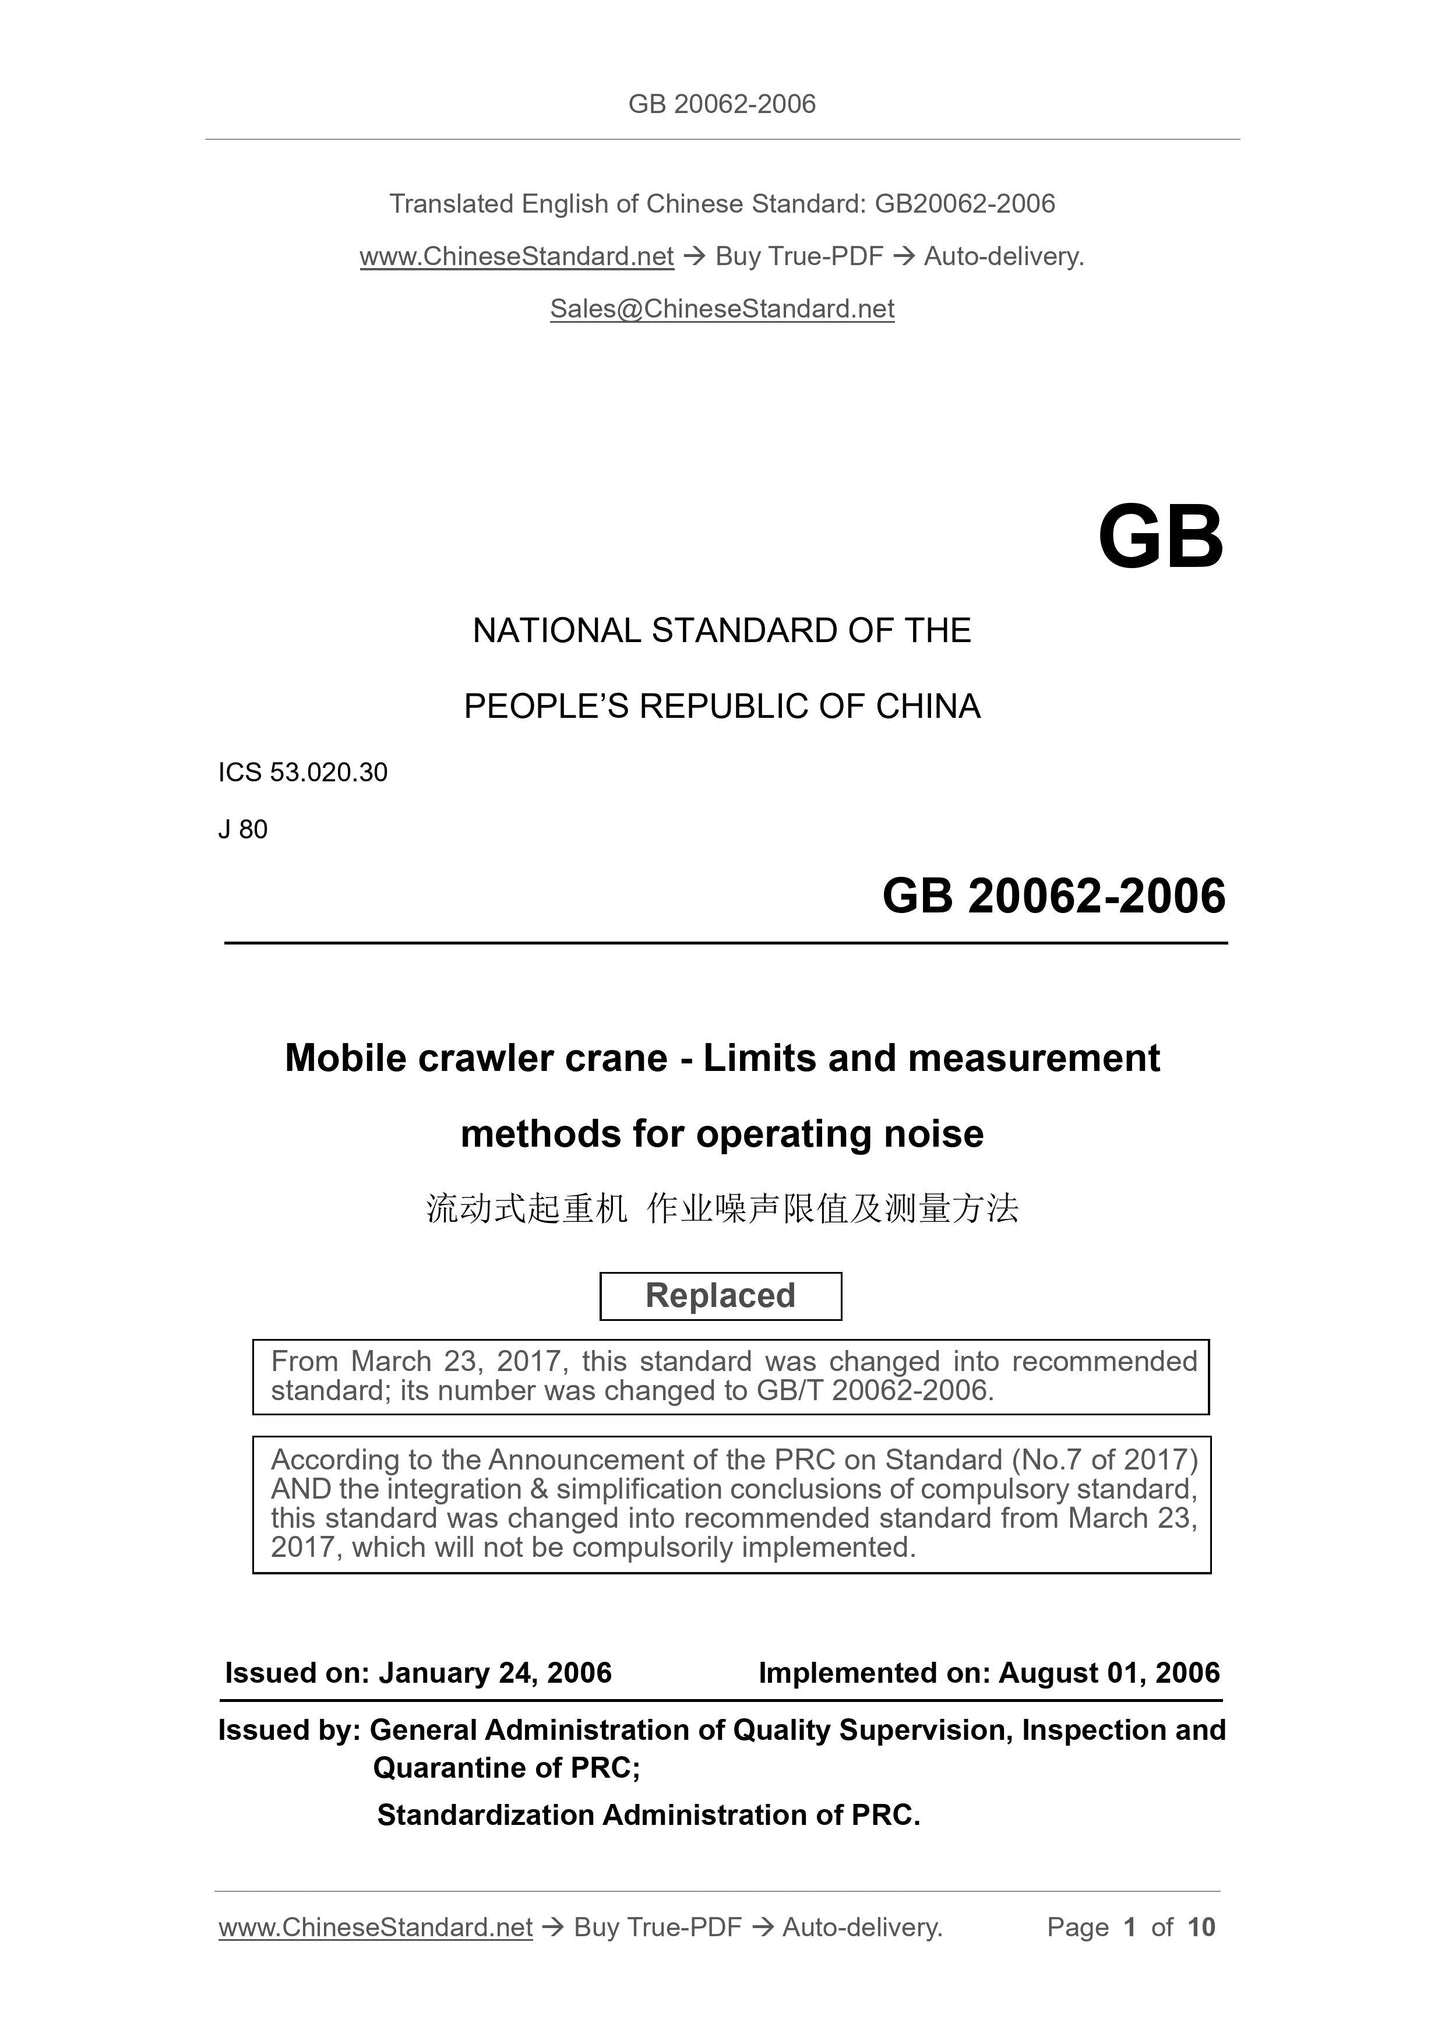 GB 20062-2006 Page 1